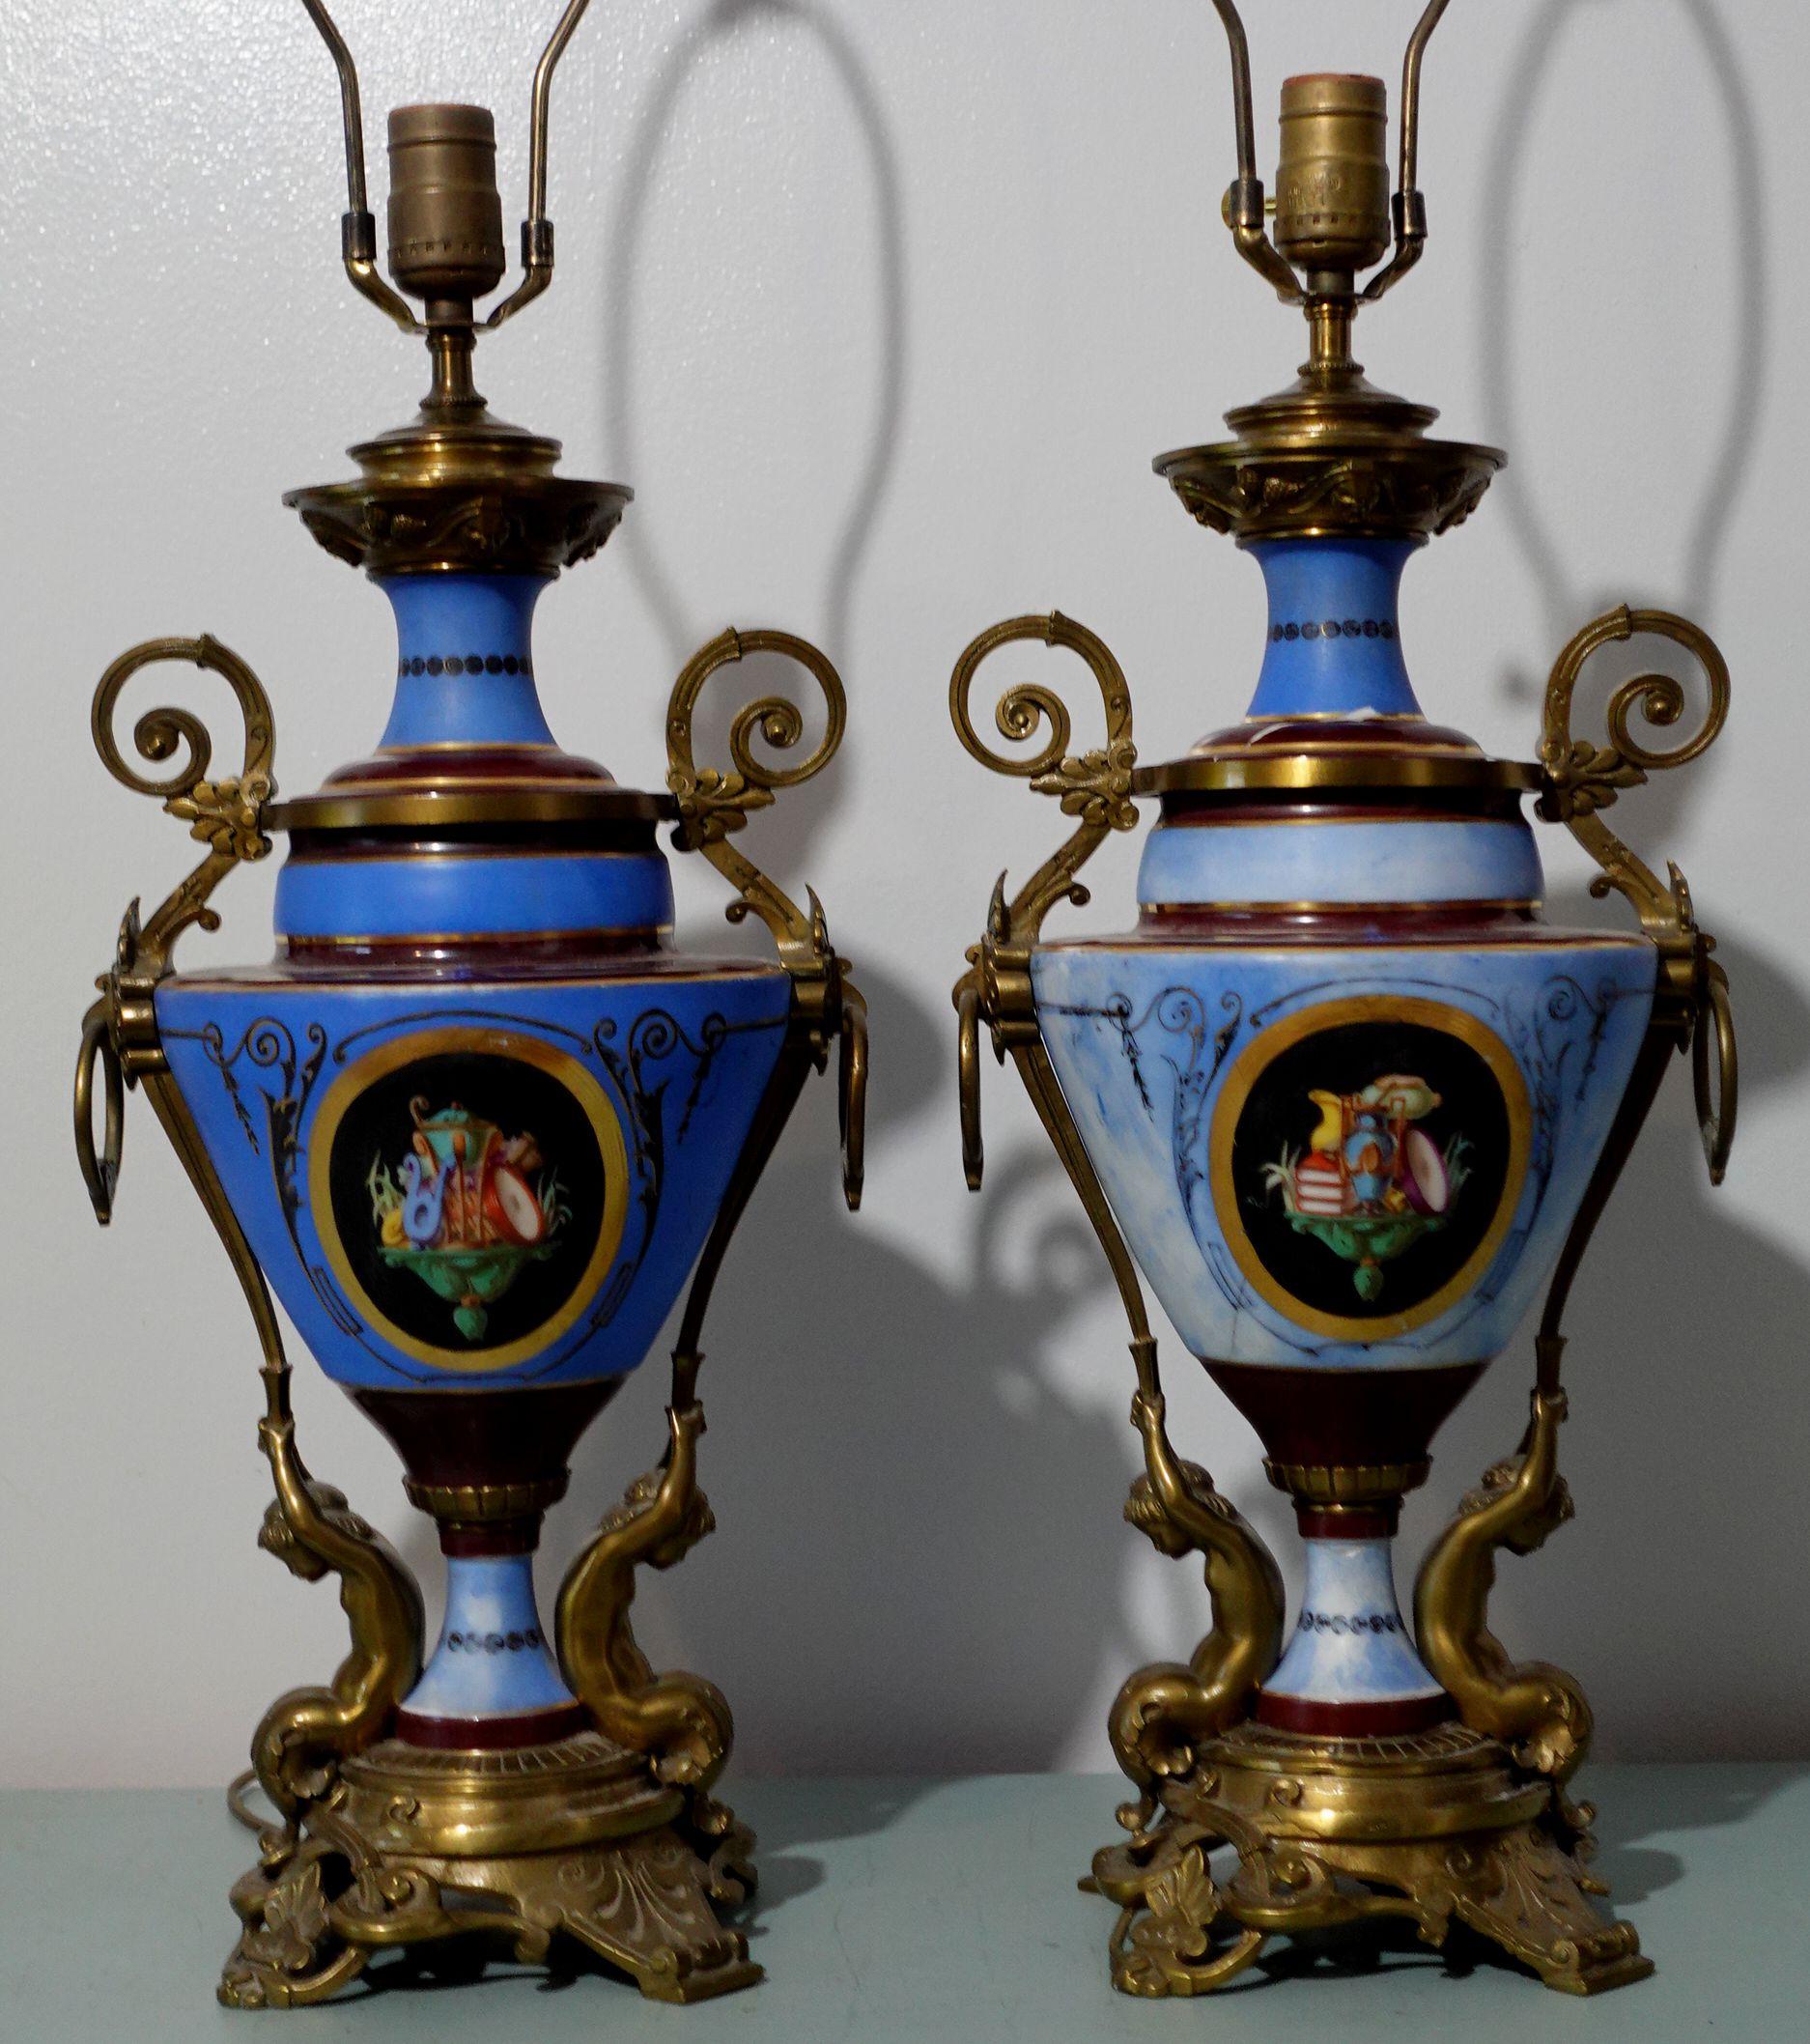 North American Pair of Neoclassical Style Porcelain and Gilt-Bronze Table Lamps For Sale